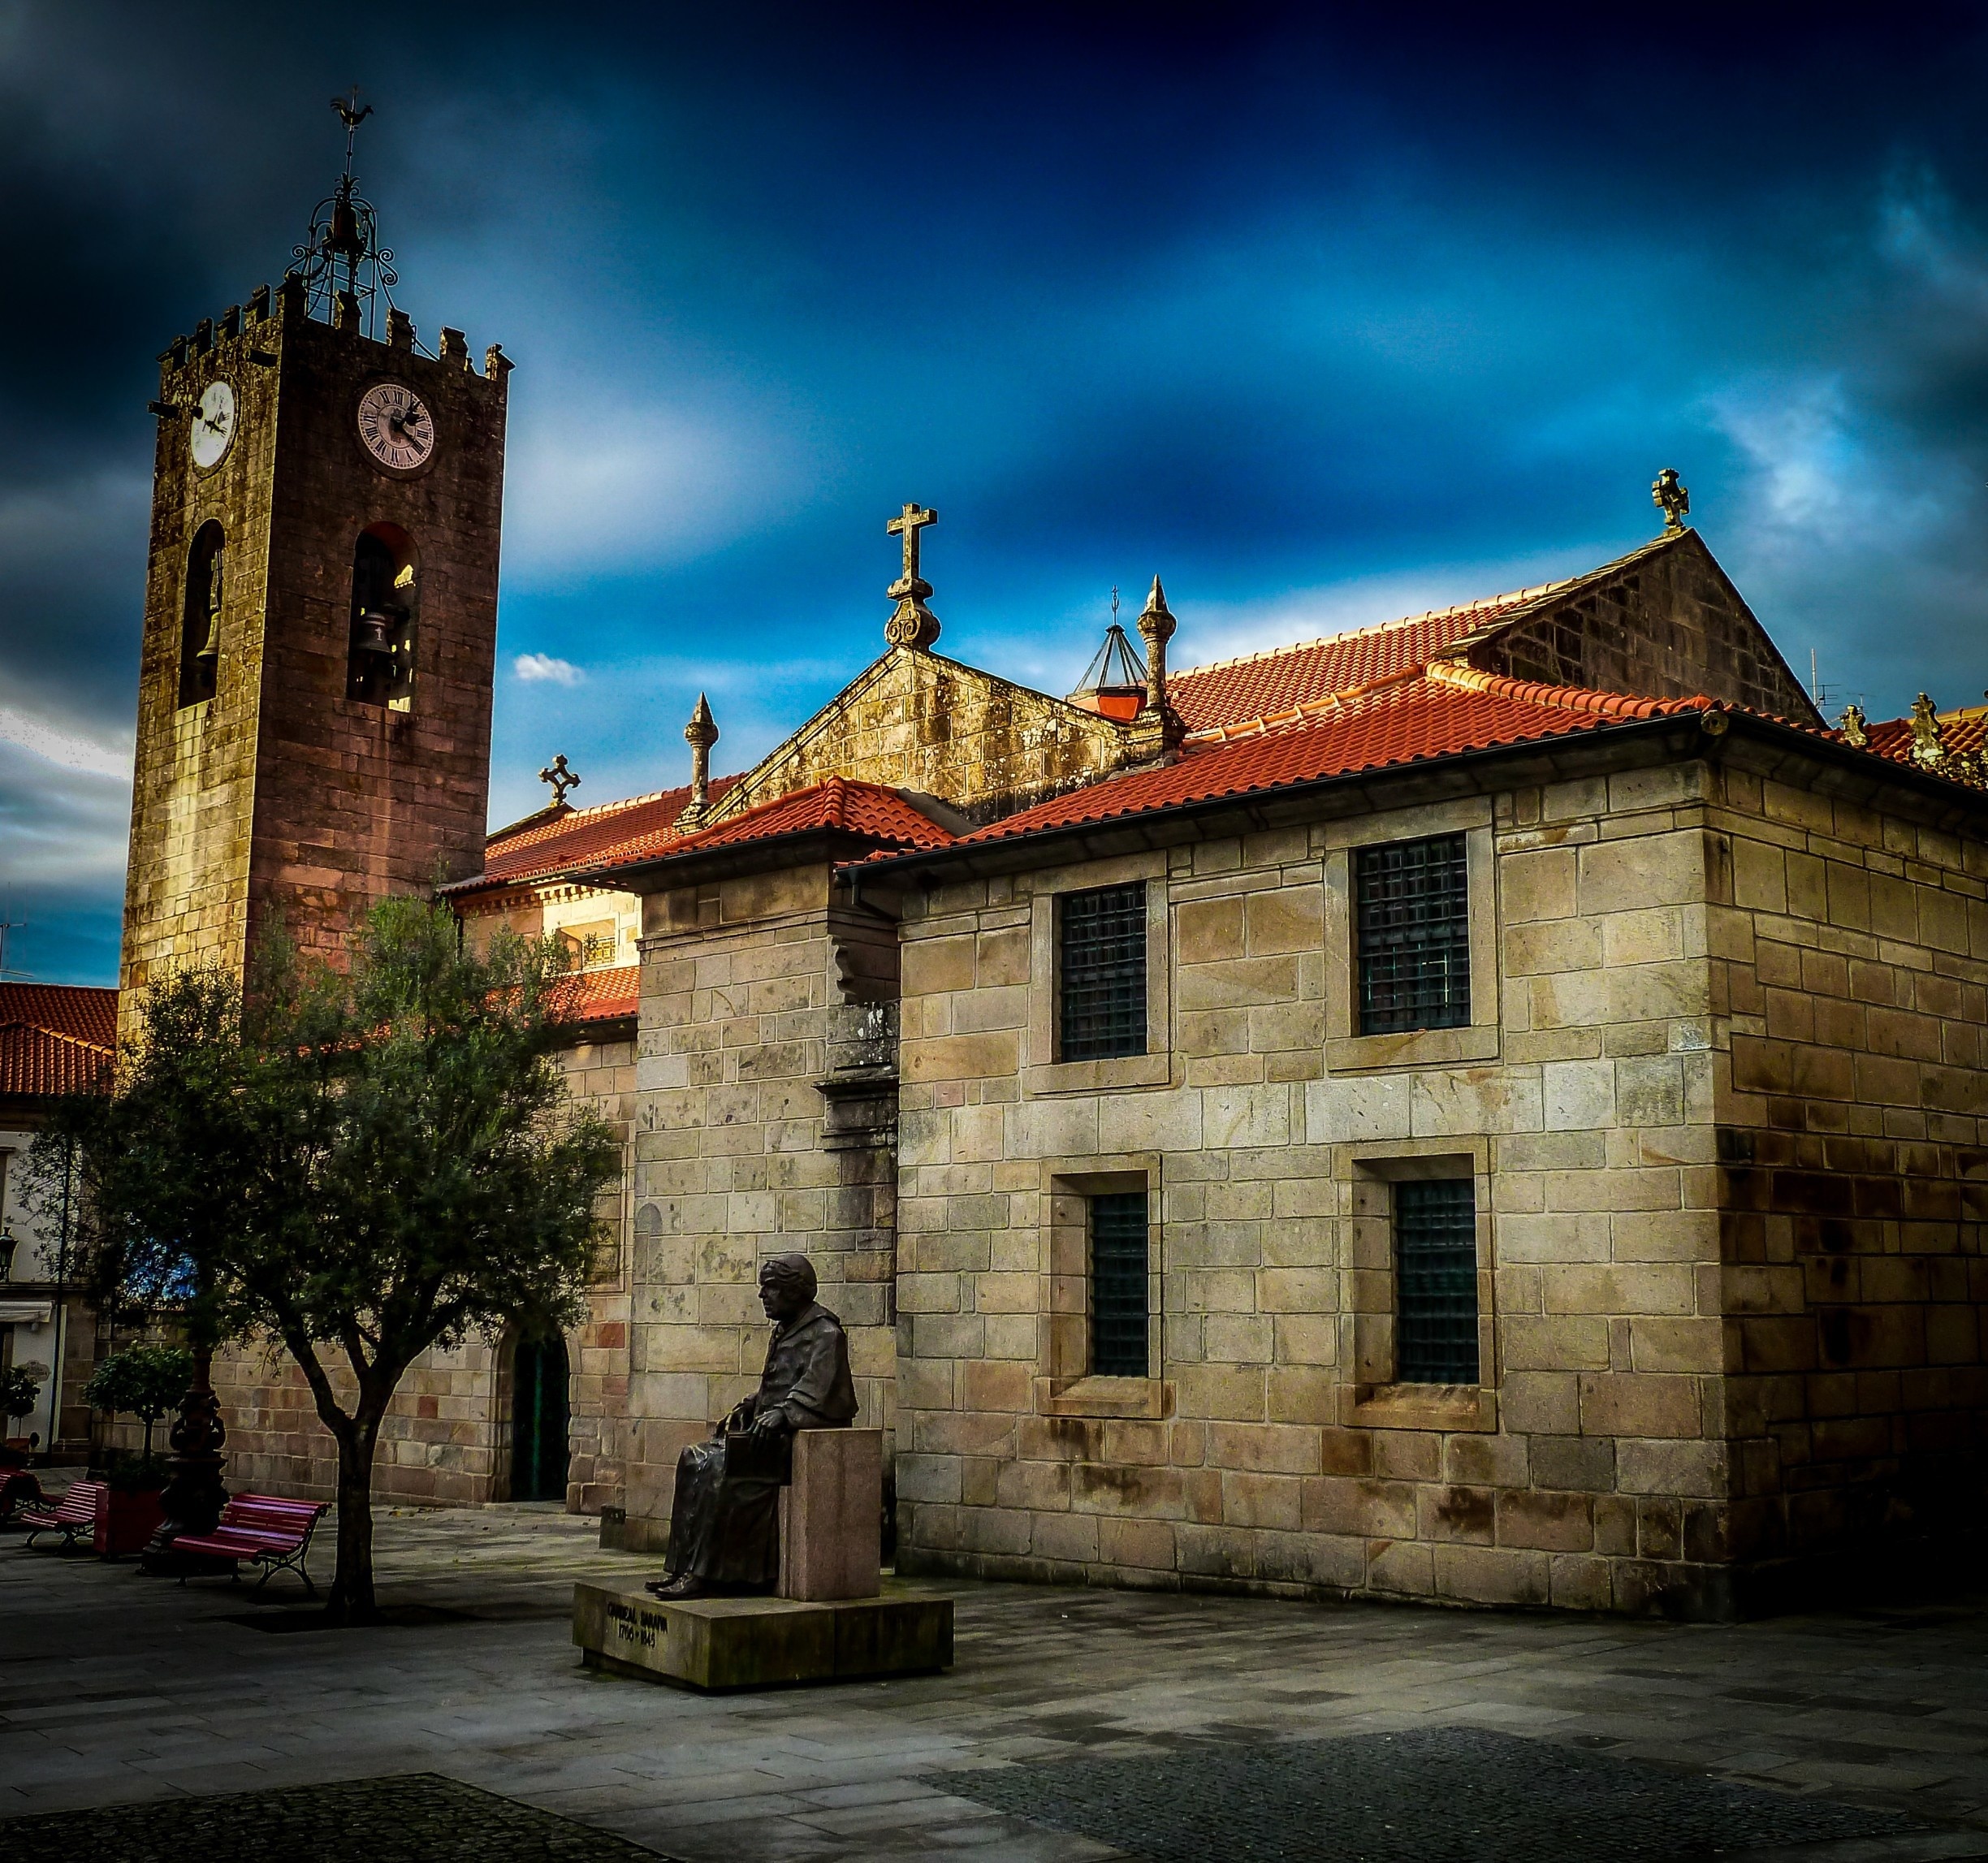 Ponte de Lima is a beautiful town located in the north of ‪#‎Portugal‬ and It is characterized by its medieval architecture and for the surrounding area, bathed by the Lima river. It's recognized as well as the oldest city in the country.

Discover more here: http://bit.ly/1Th020p